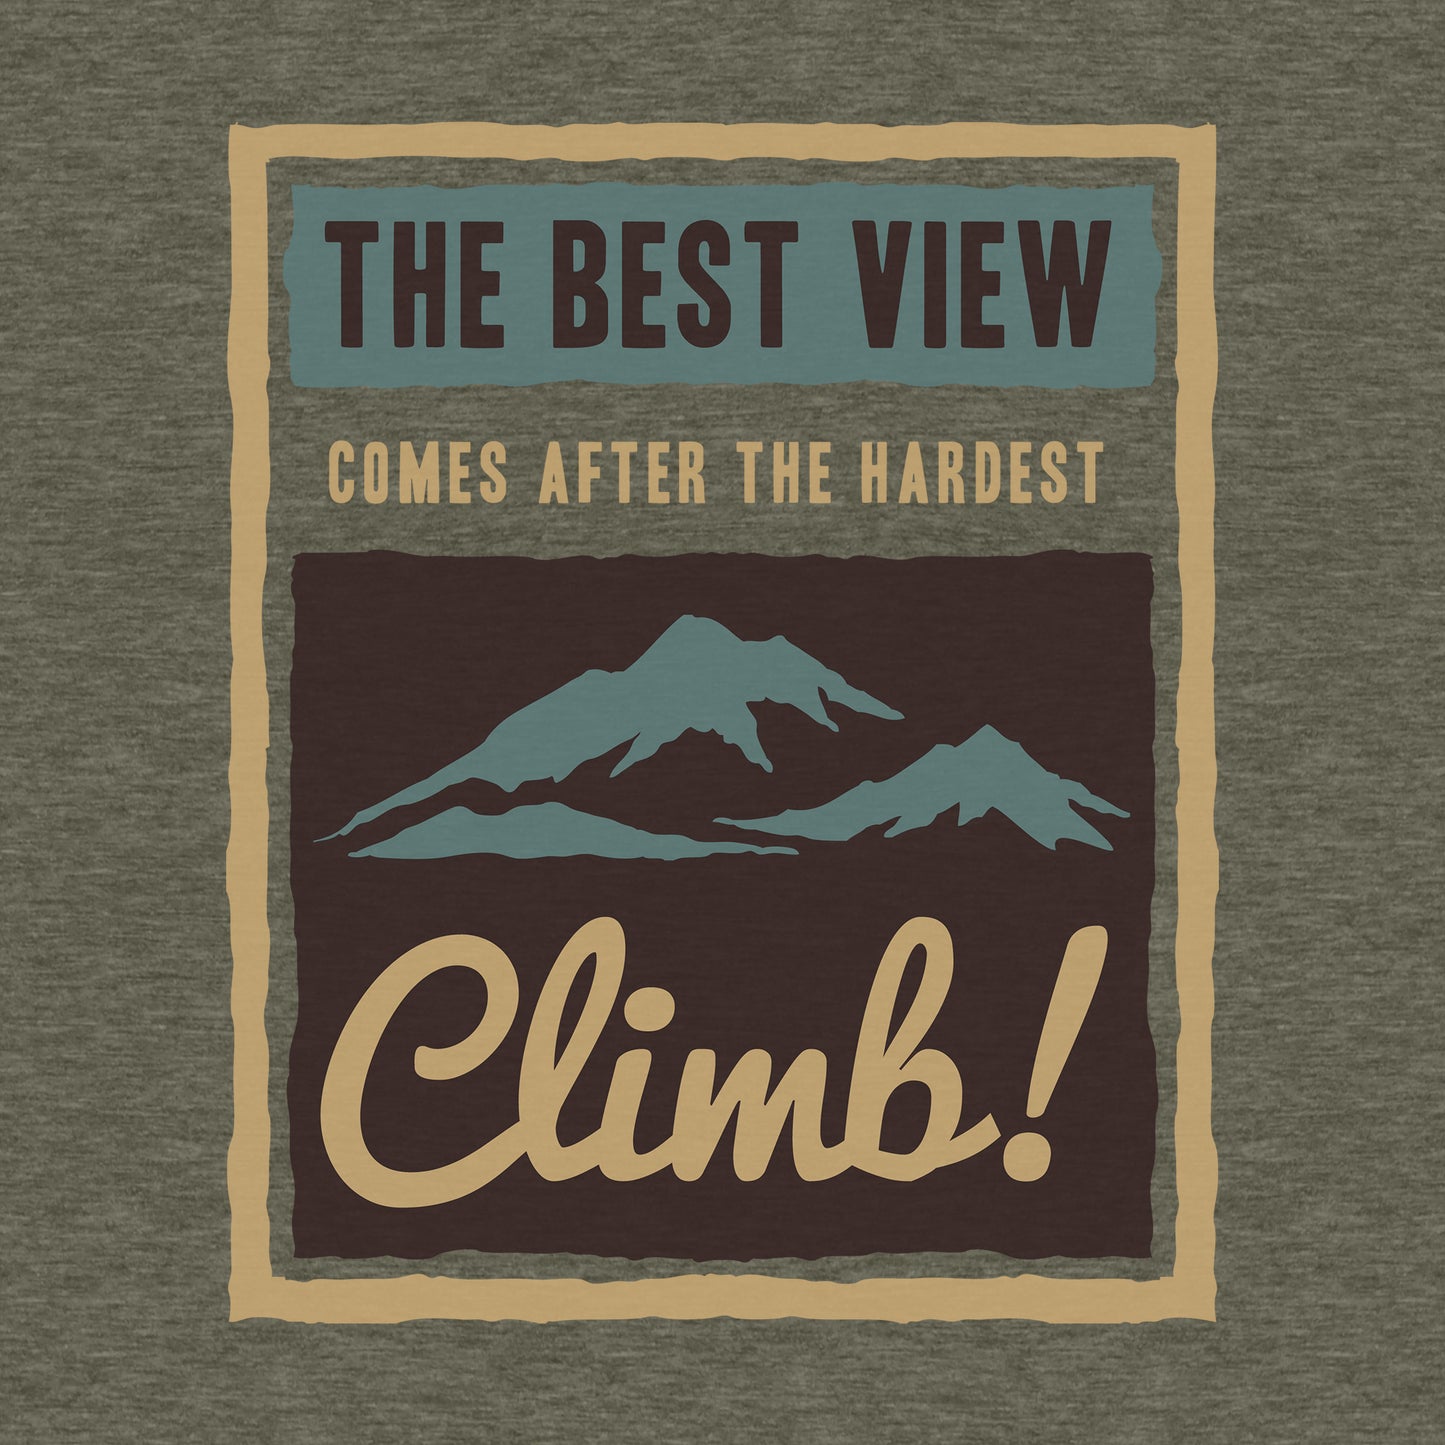 Best View Comes After the Hardest Climb - Adult Unisex Cotton/Poly Fleece Hoodie